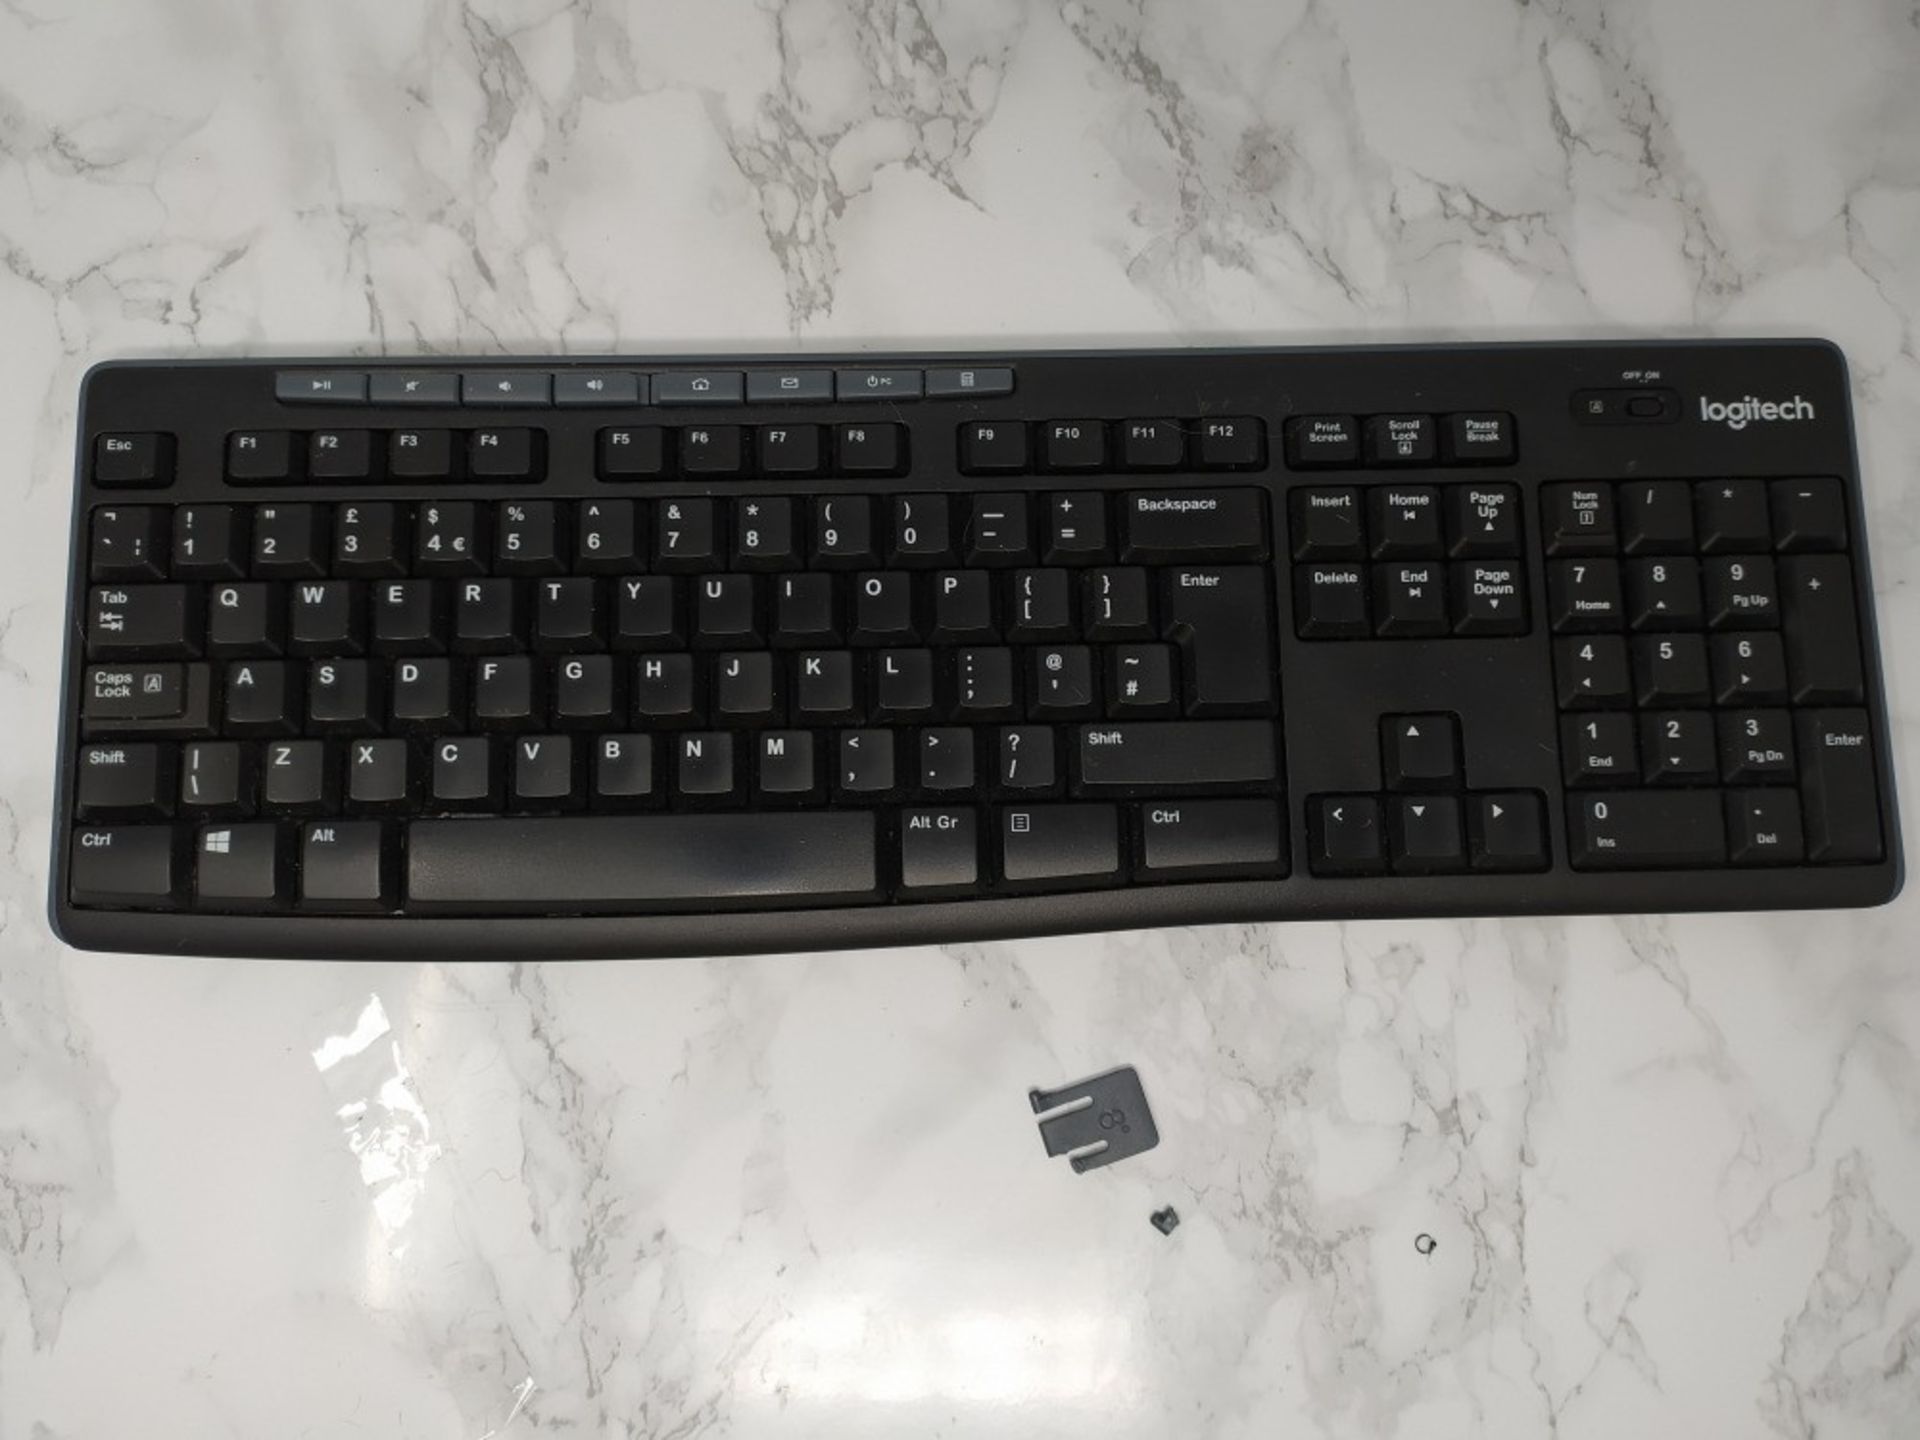 [INCOMPLETE] [CRACKED] Logitech MK270 Wireless Keyboard and Mouse Combo for Windows, 2 - Image 2 of 2